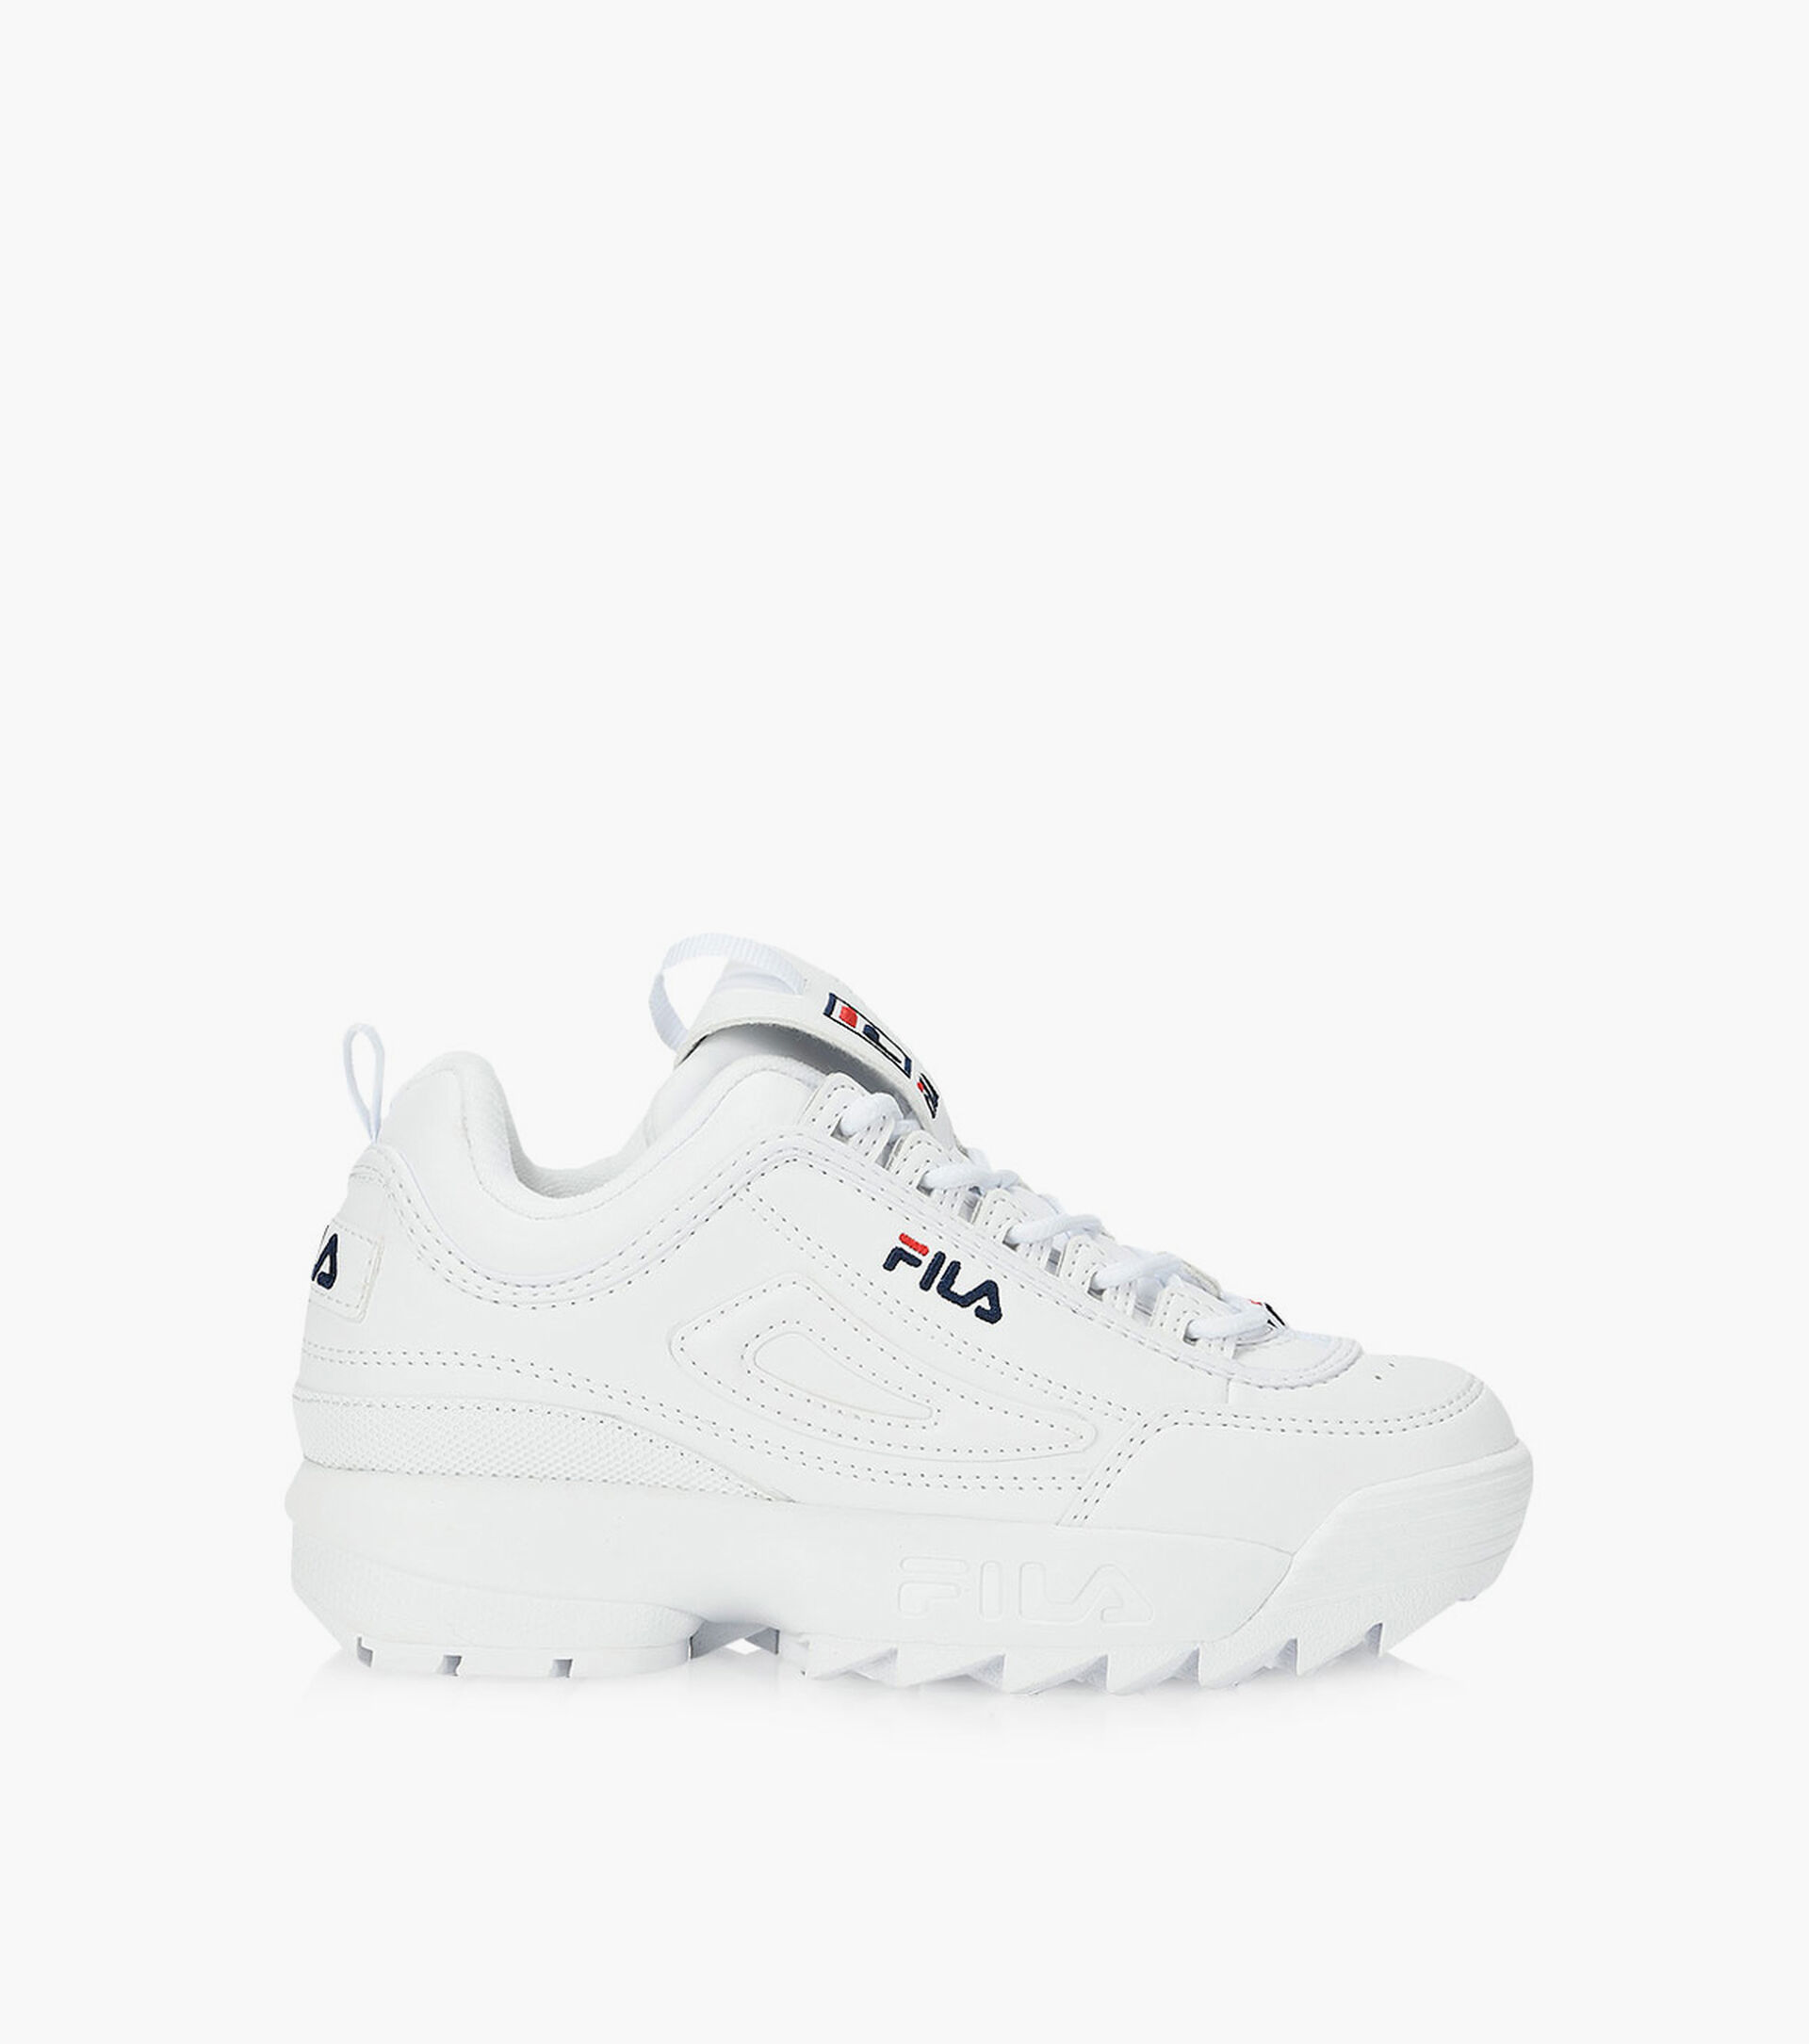 FILA DISRUPTOR 2 PREMIUM - White & Colour Synthetic | Browns Shoes